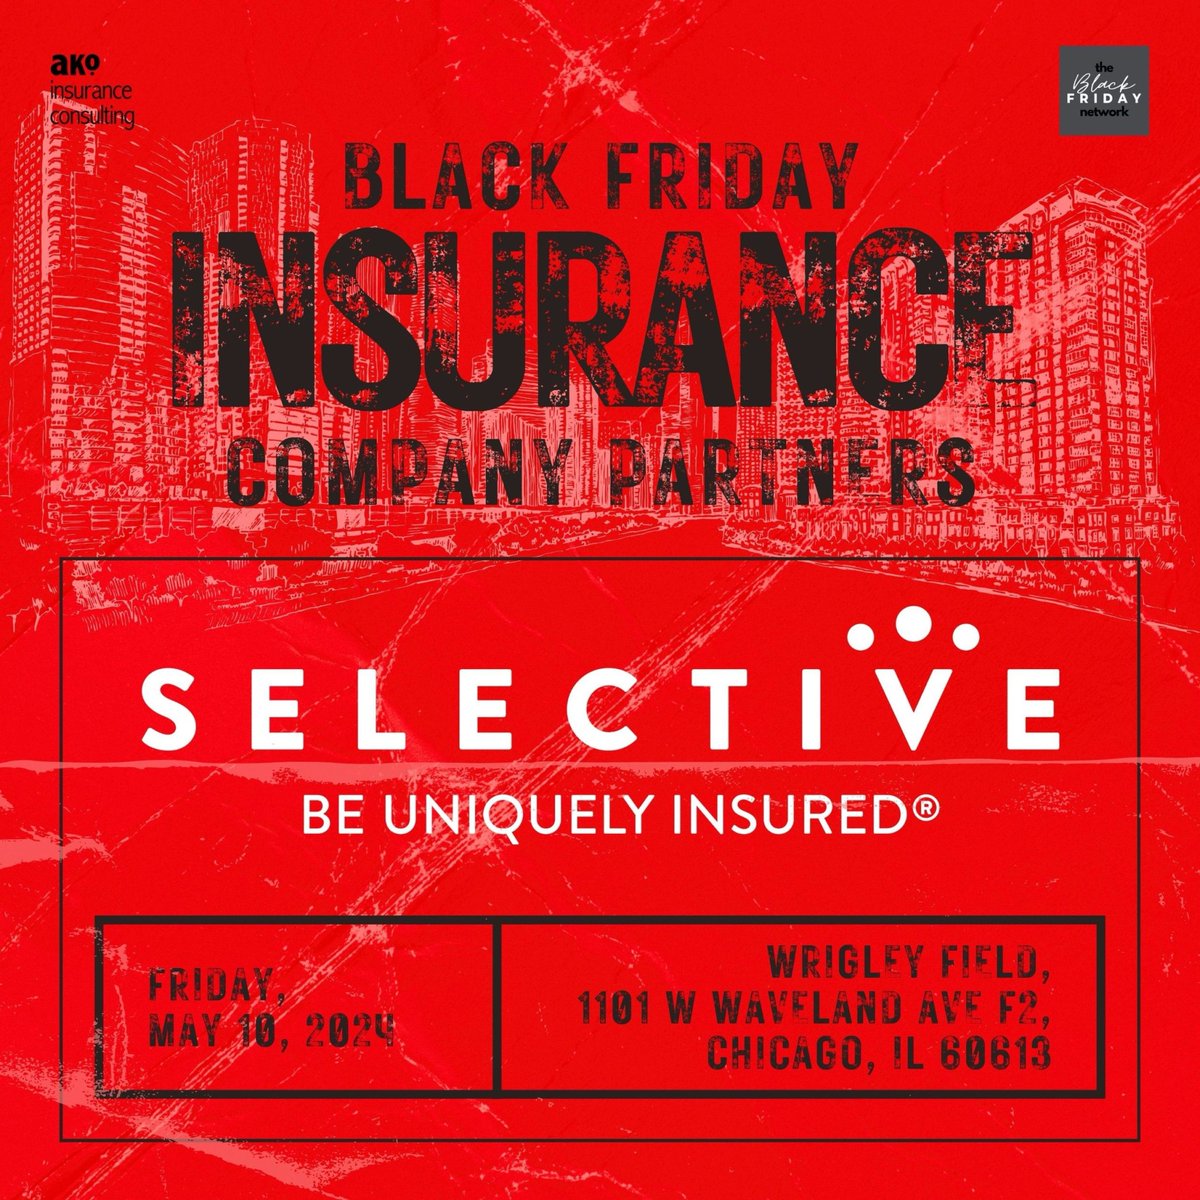 Securing appointments with insurance companies is undoubtedly crucial f...
blackfriday.akoinsuranceconsulting.com

#insuranceindustry #insuranceagent #consultativeresources #insurance #jollofpie #TheBlackFridayNetwork #agentsolidarity #insuranceprofessionals #agencyowner #equitableopportunities